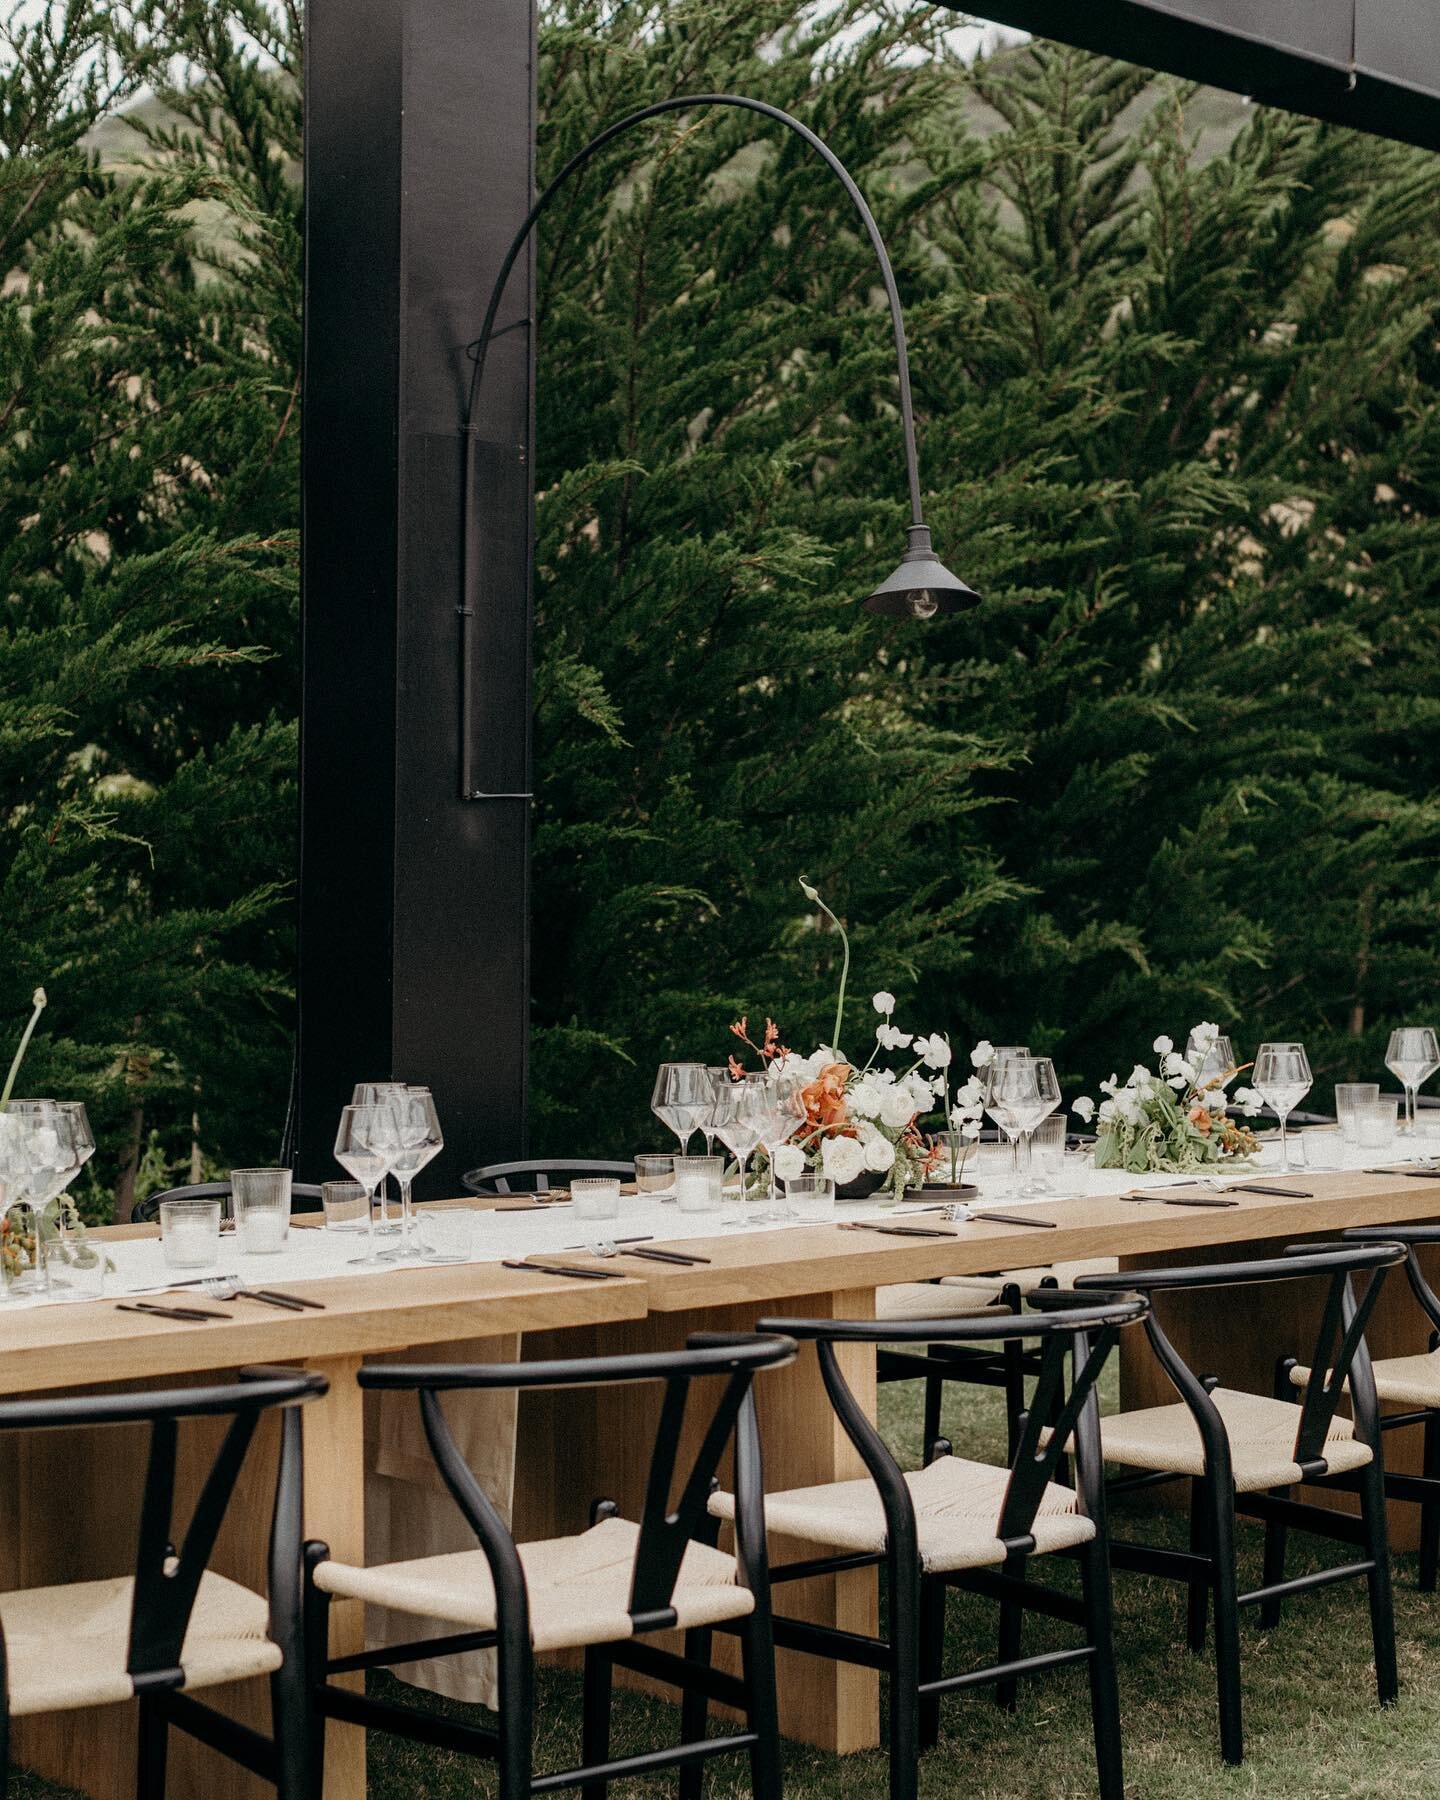 Custom lighting and structure that blends in with the setting vs fighting it. Photo @katherineannrose structure @bellavistadesigns florals @hart_floral